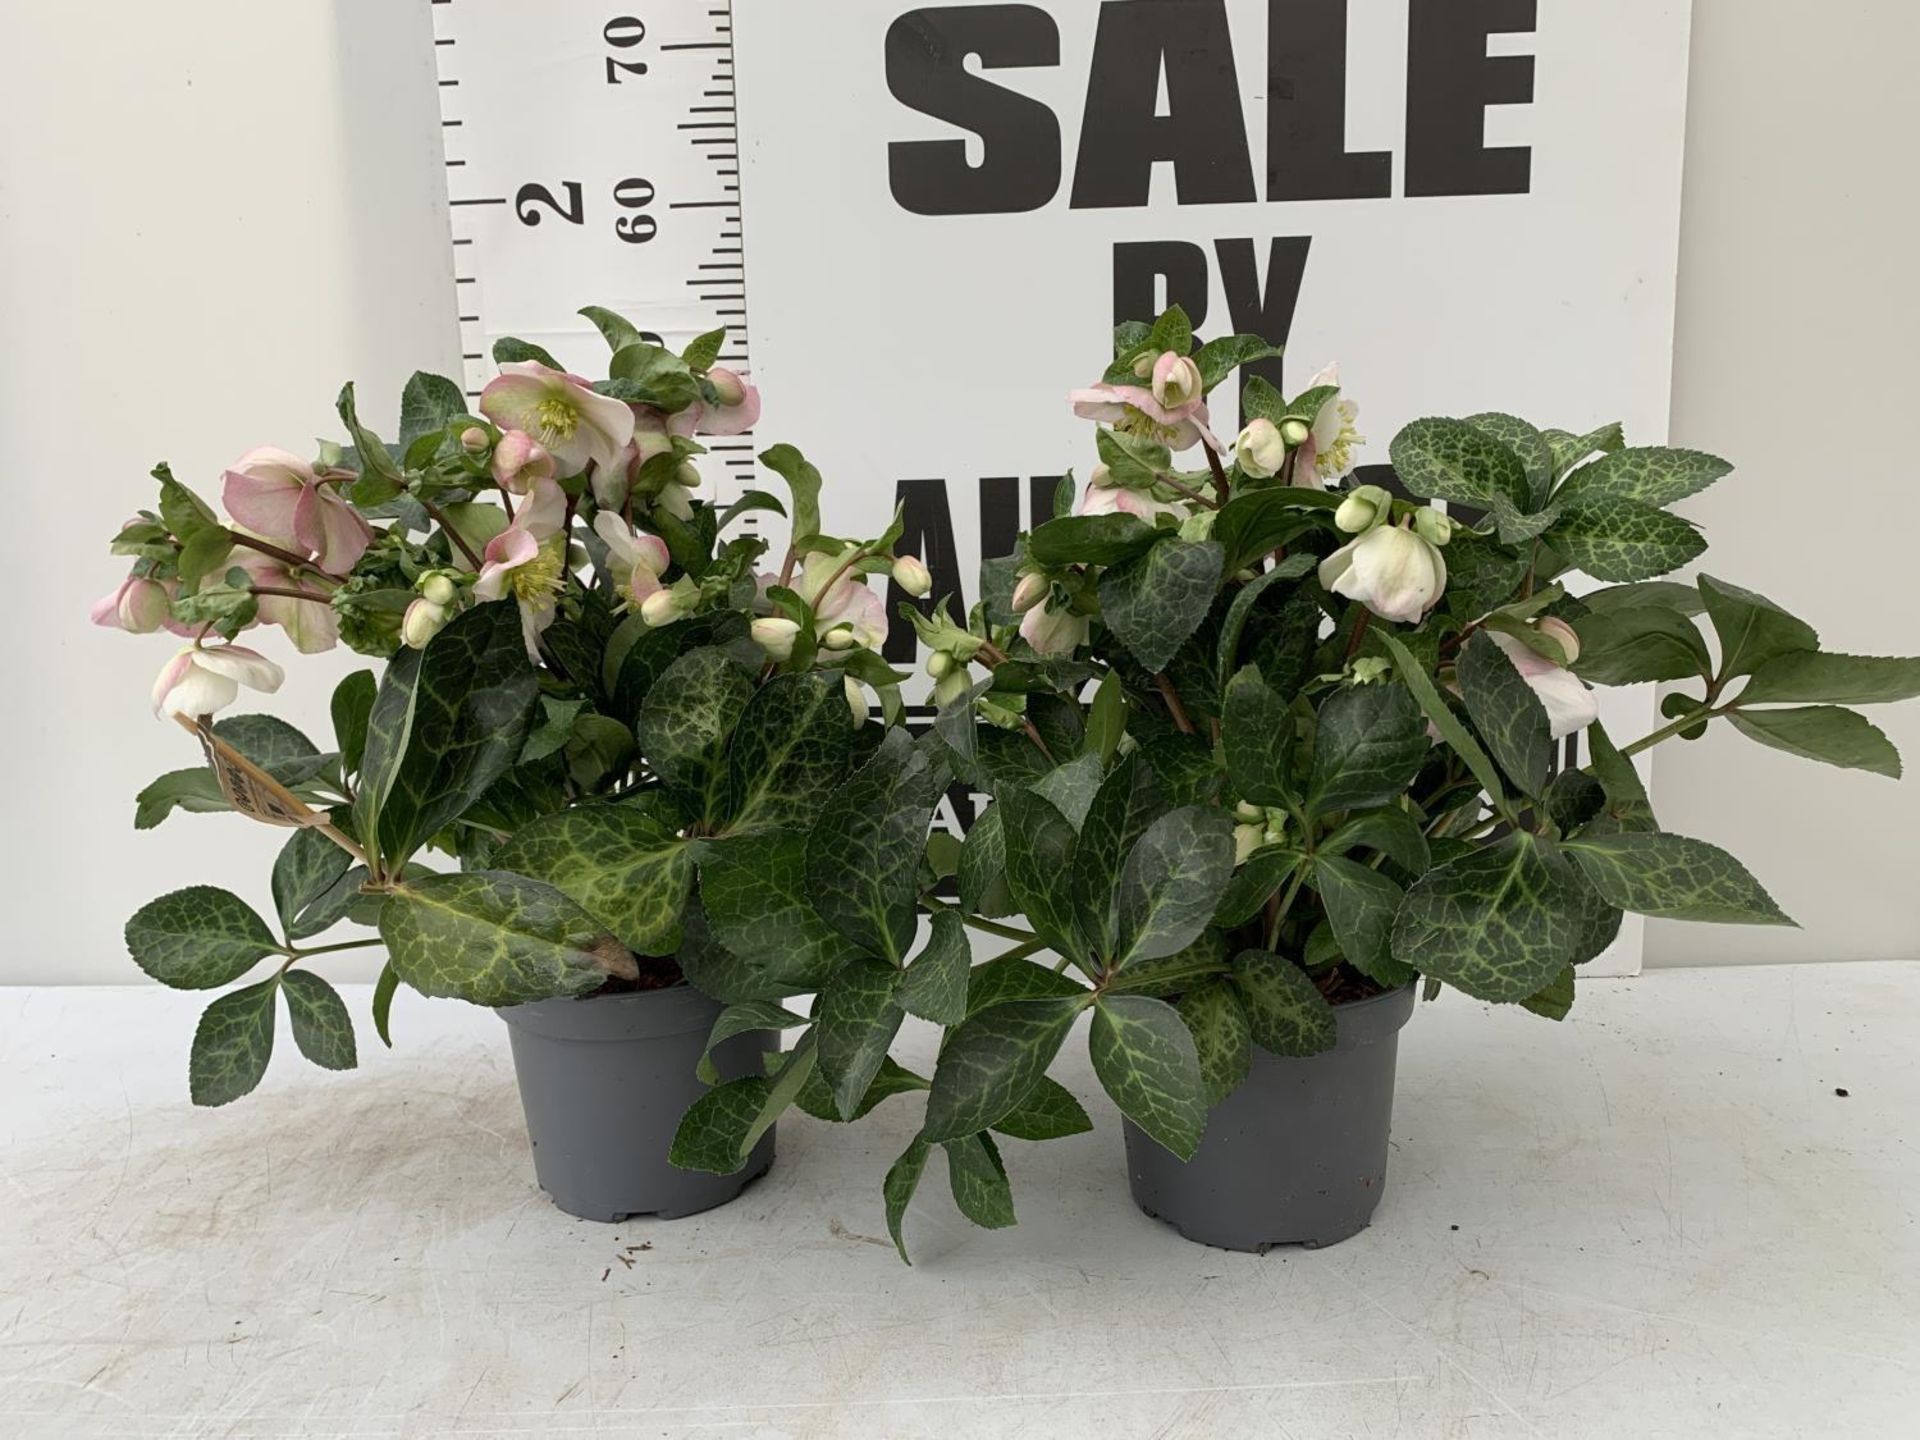 WELCOME TO ASHLEY WALLER HORTICULTURE AUCTION - LOTS ARE BEING ADDED DAILY - THE IMAGES SHOW LOTS - Image 46 of 51